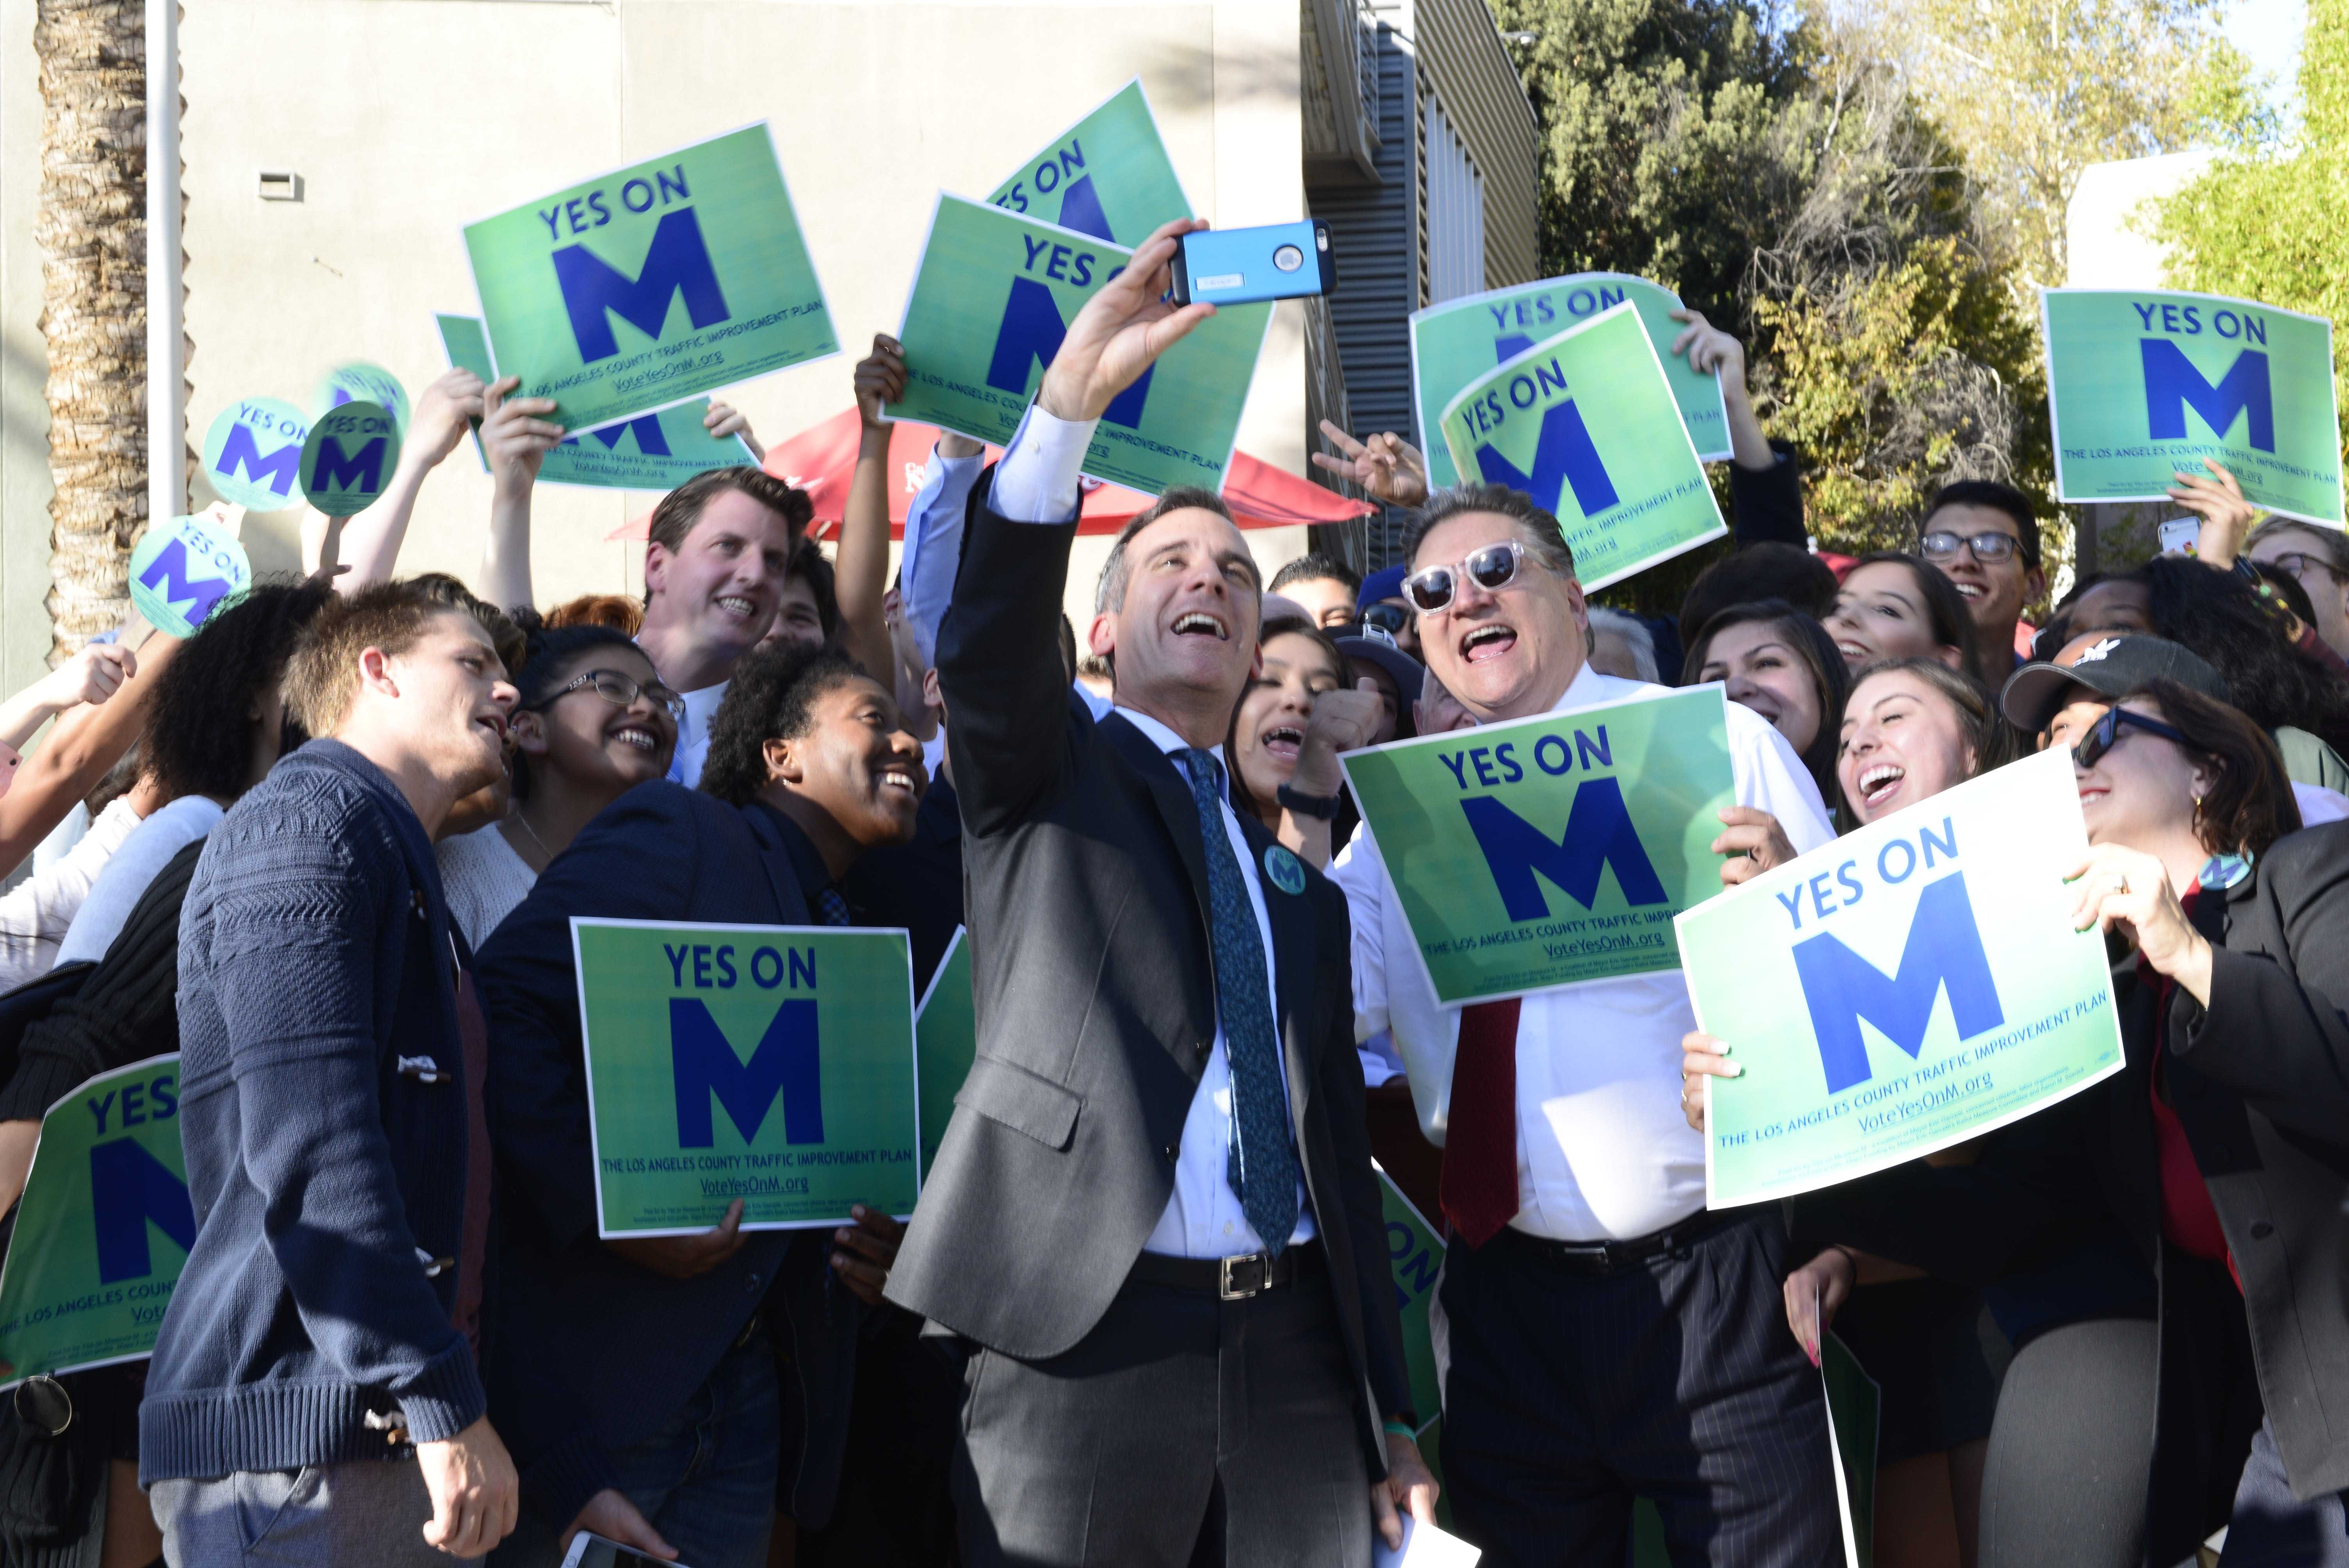 Mayor shown taking picture with people holding signs that read, Yes on M